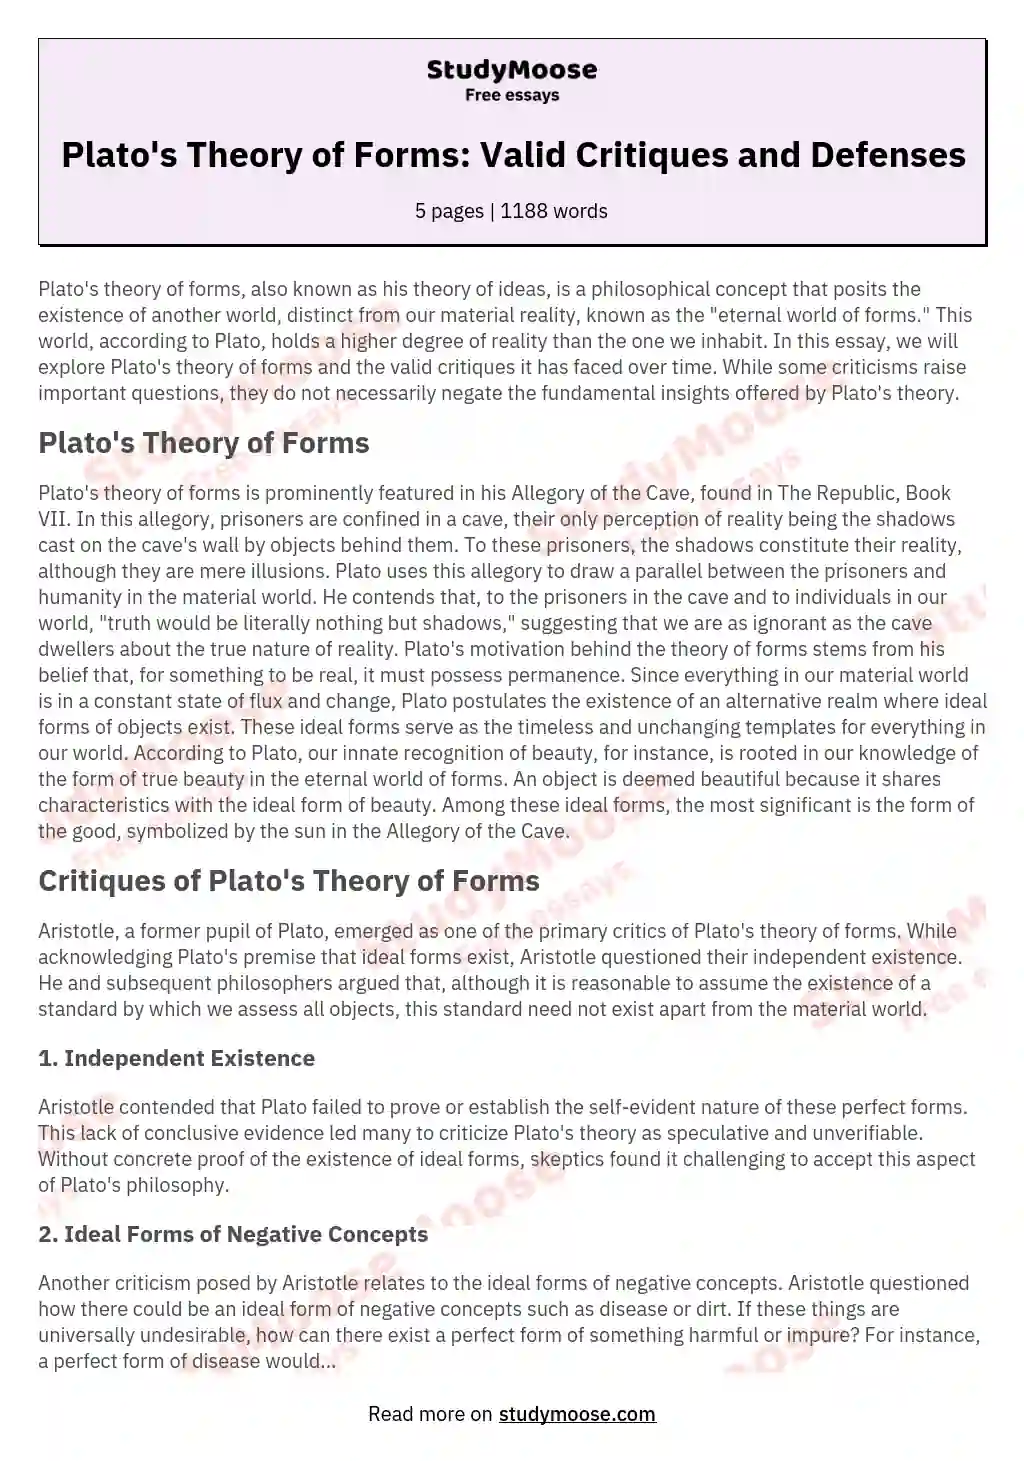 Plato's Theory of Forms: Valid Critiques and Defenses essay